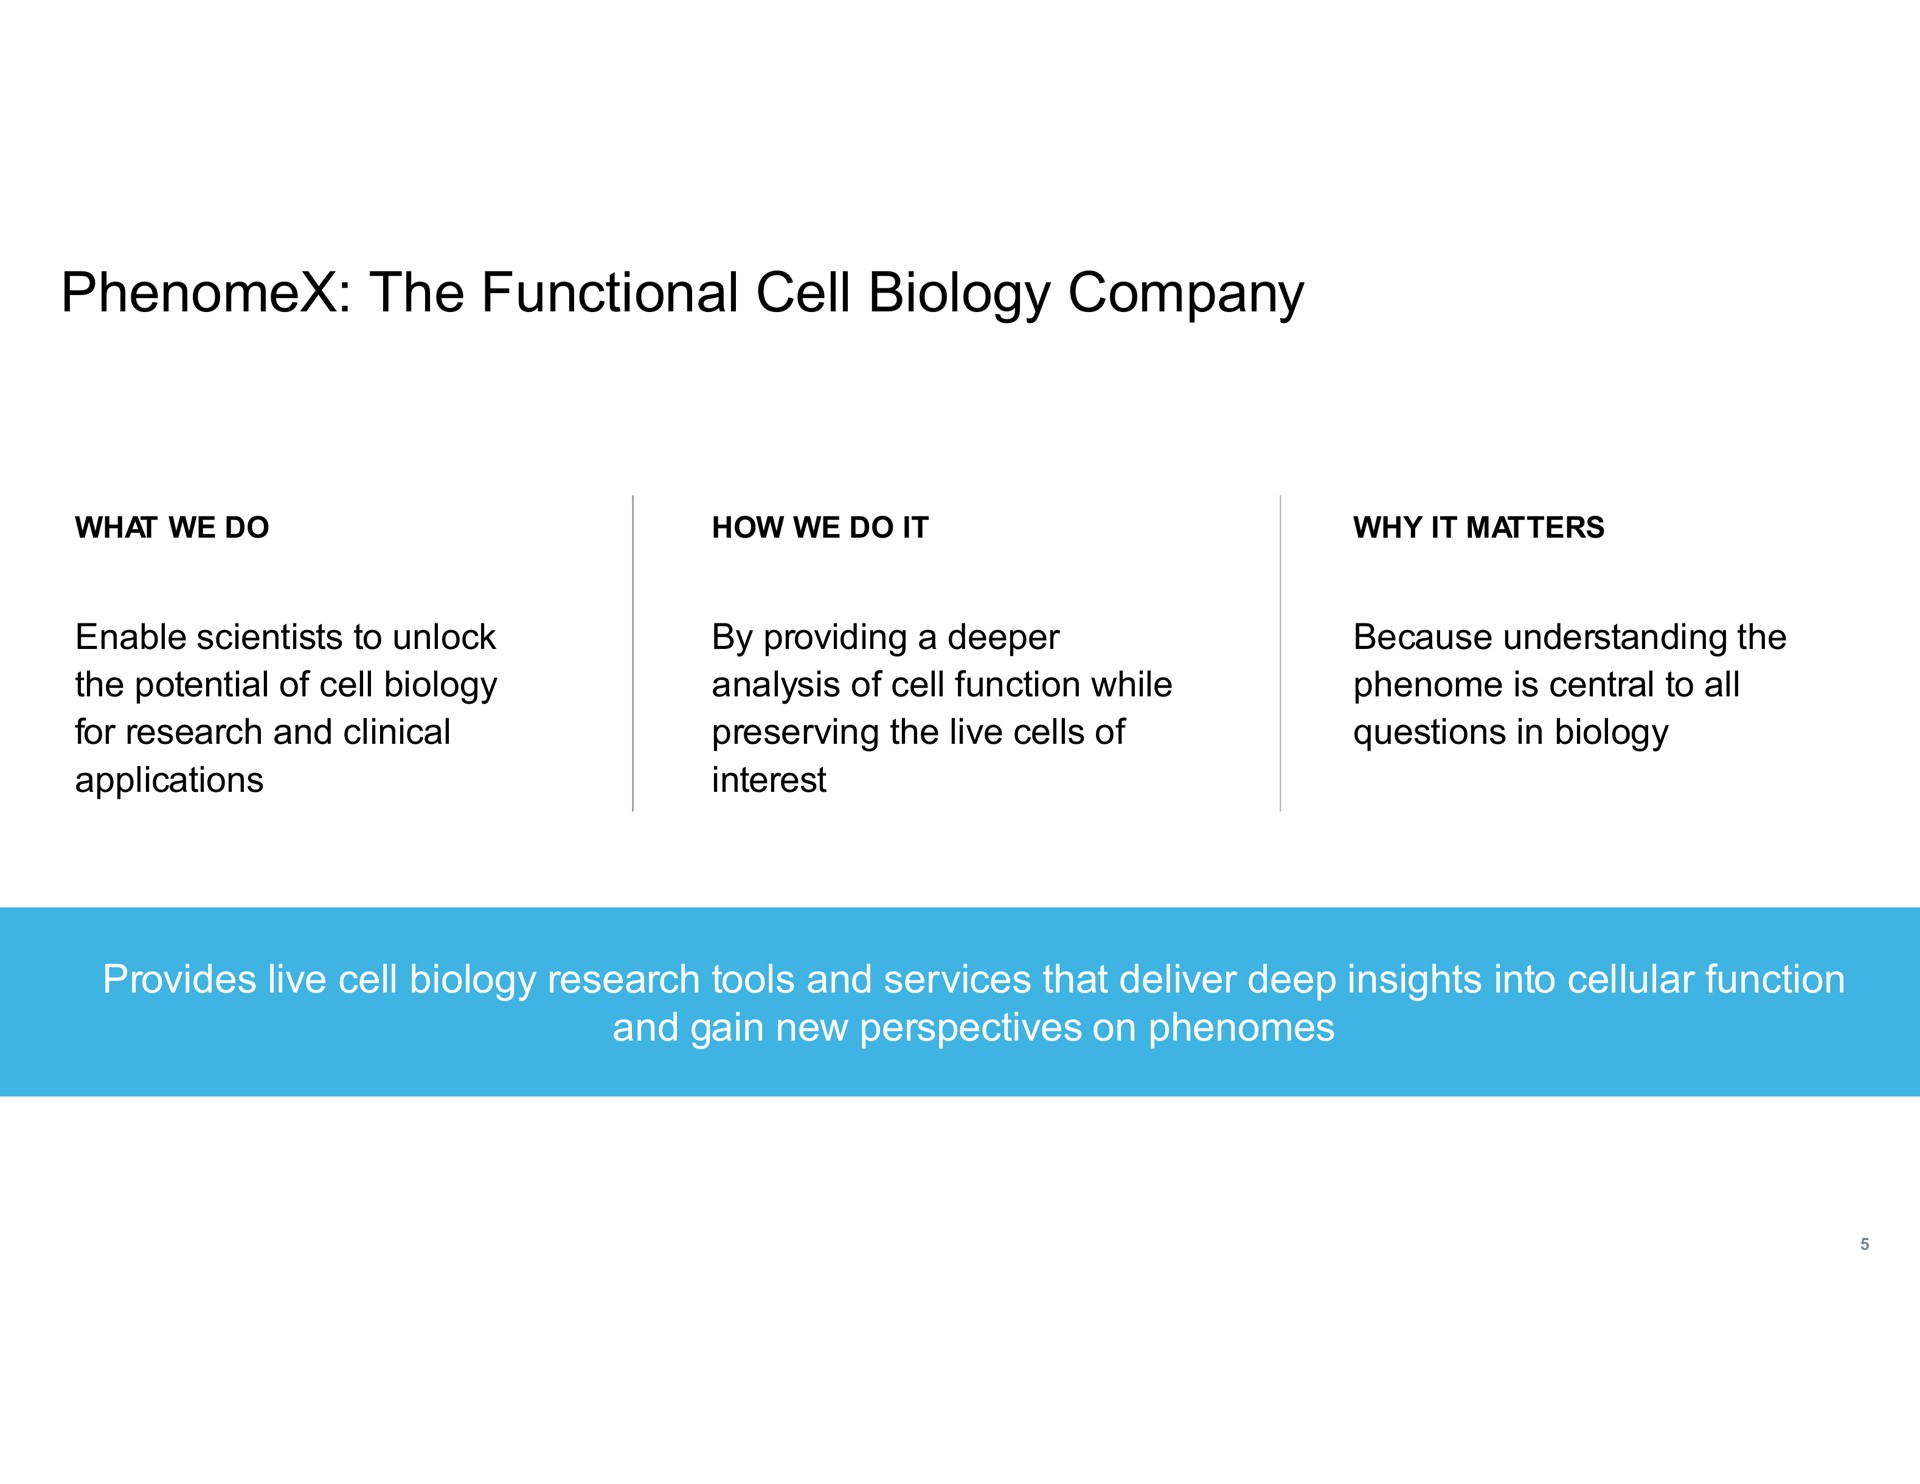 the functional cell biology company provides live cell biology research tools and services that deliver deep insights into cellular function and gain new perspectives on | Berkeley Lights